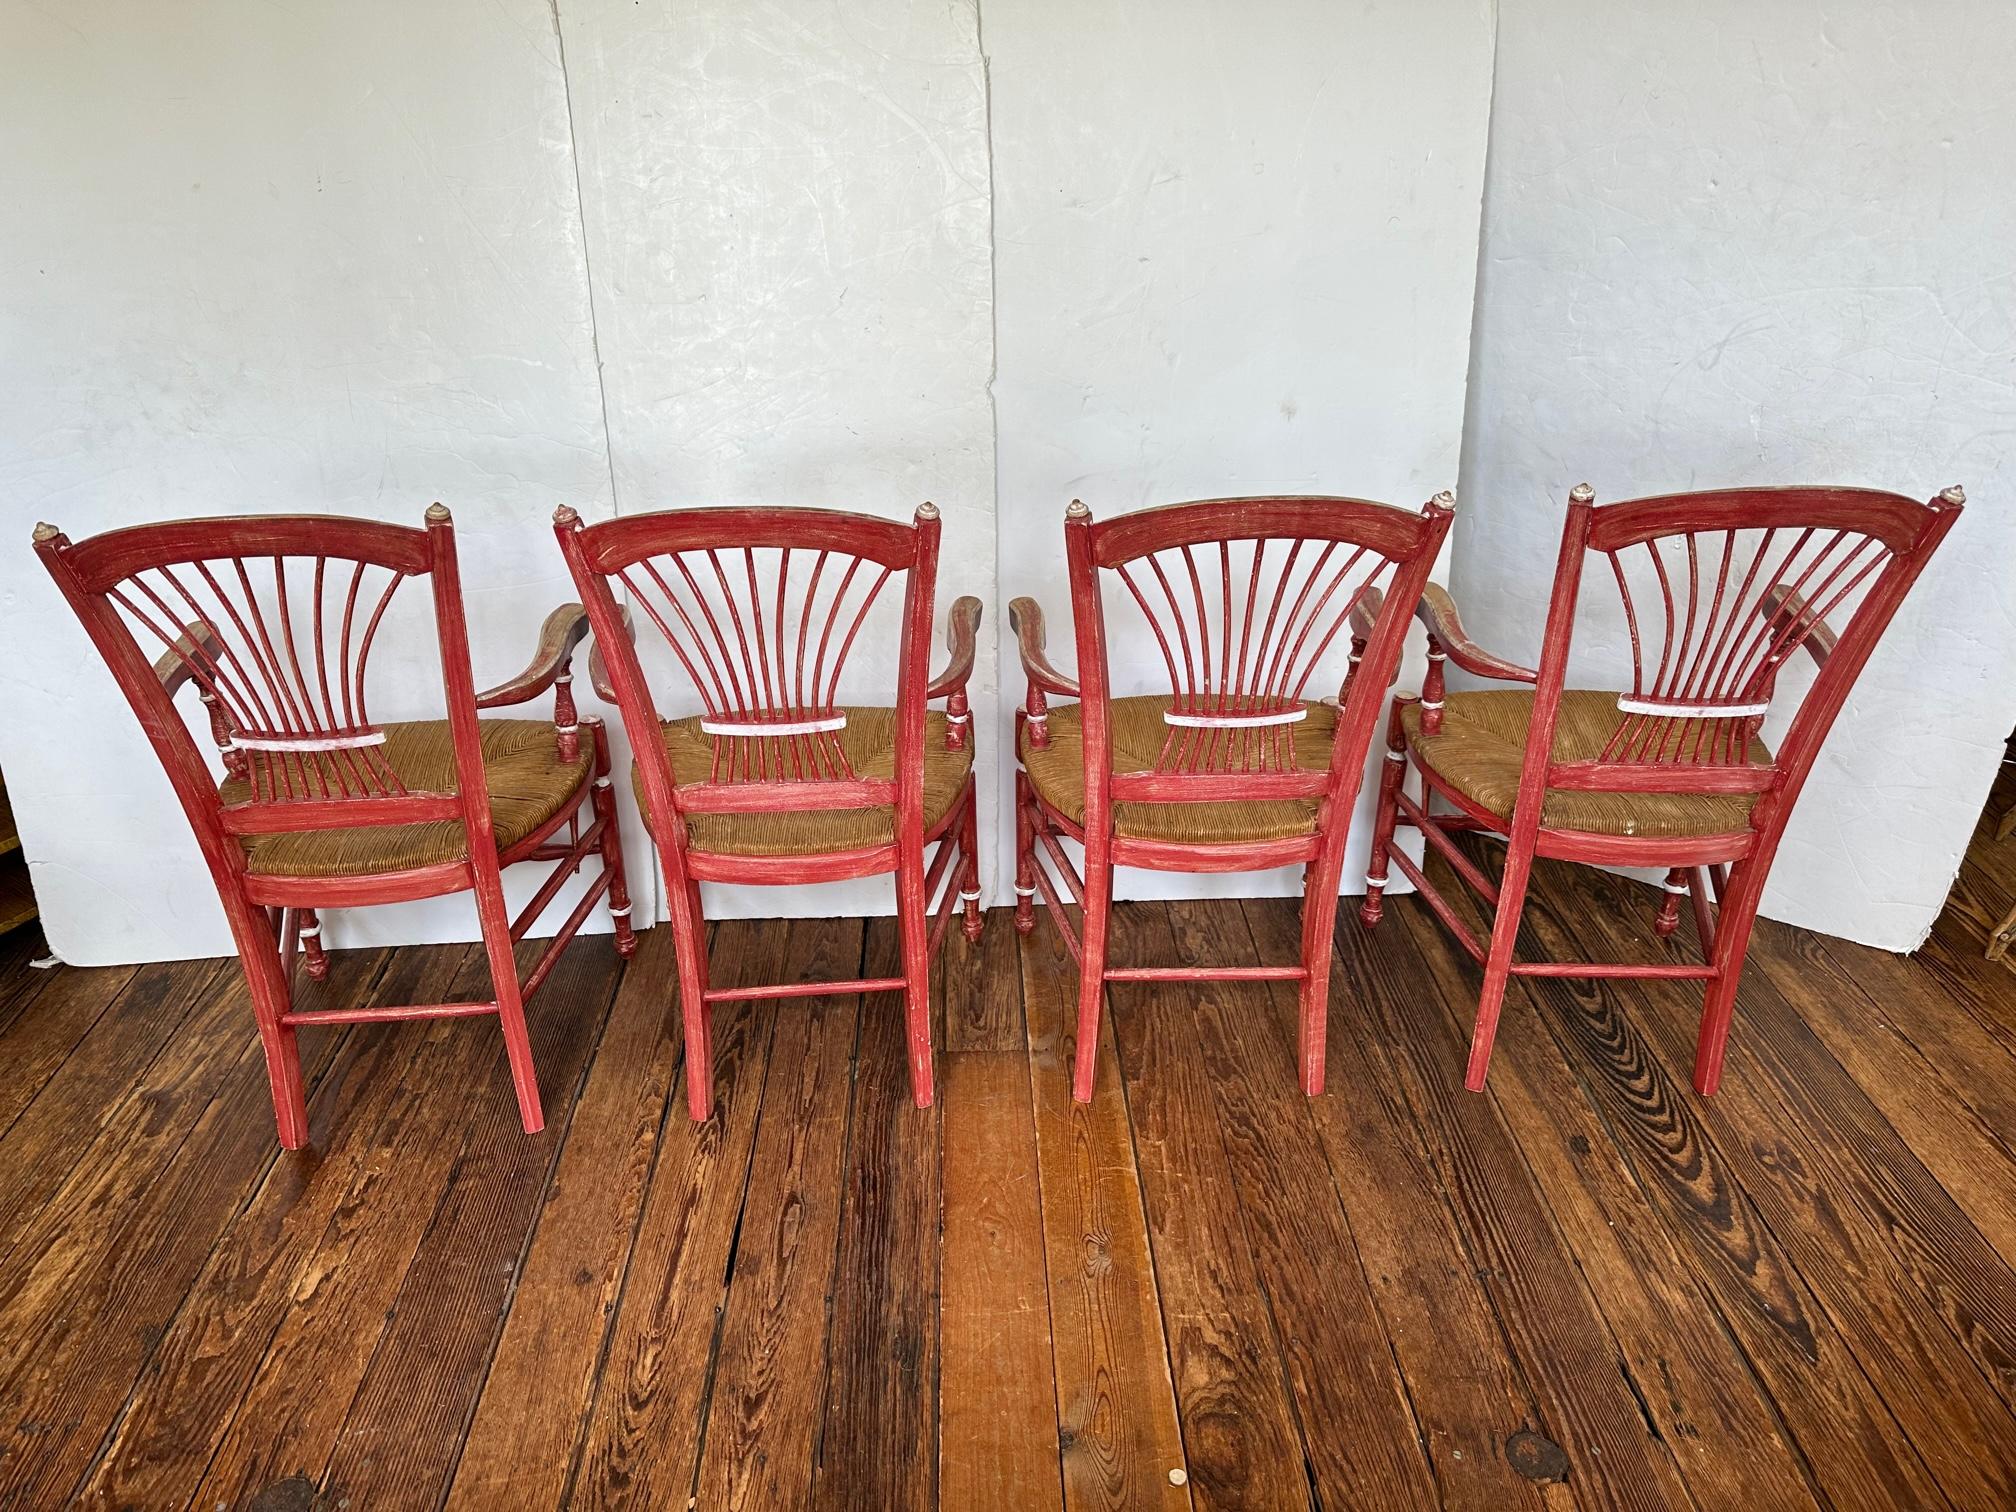 Set of 4 French Country dining chairs, all of them arm chairs, having wonderful spindle wheat sheaf style backs and natural rush seats.  They are painted a red rasberry with an antiqued finish and silver detailing.